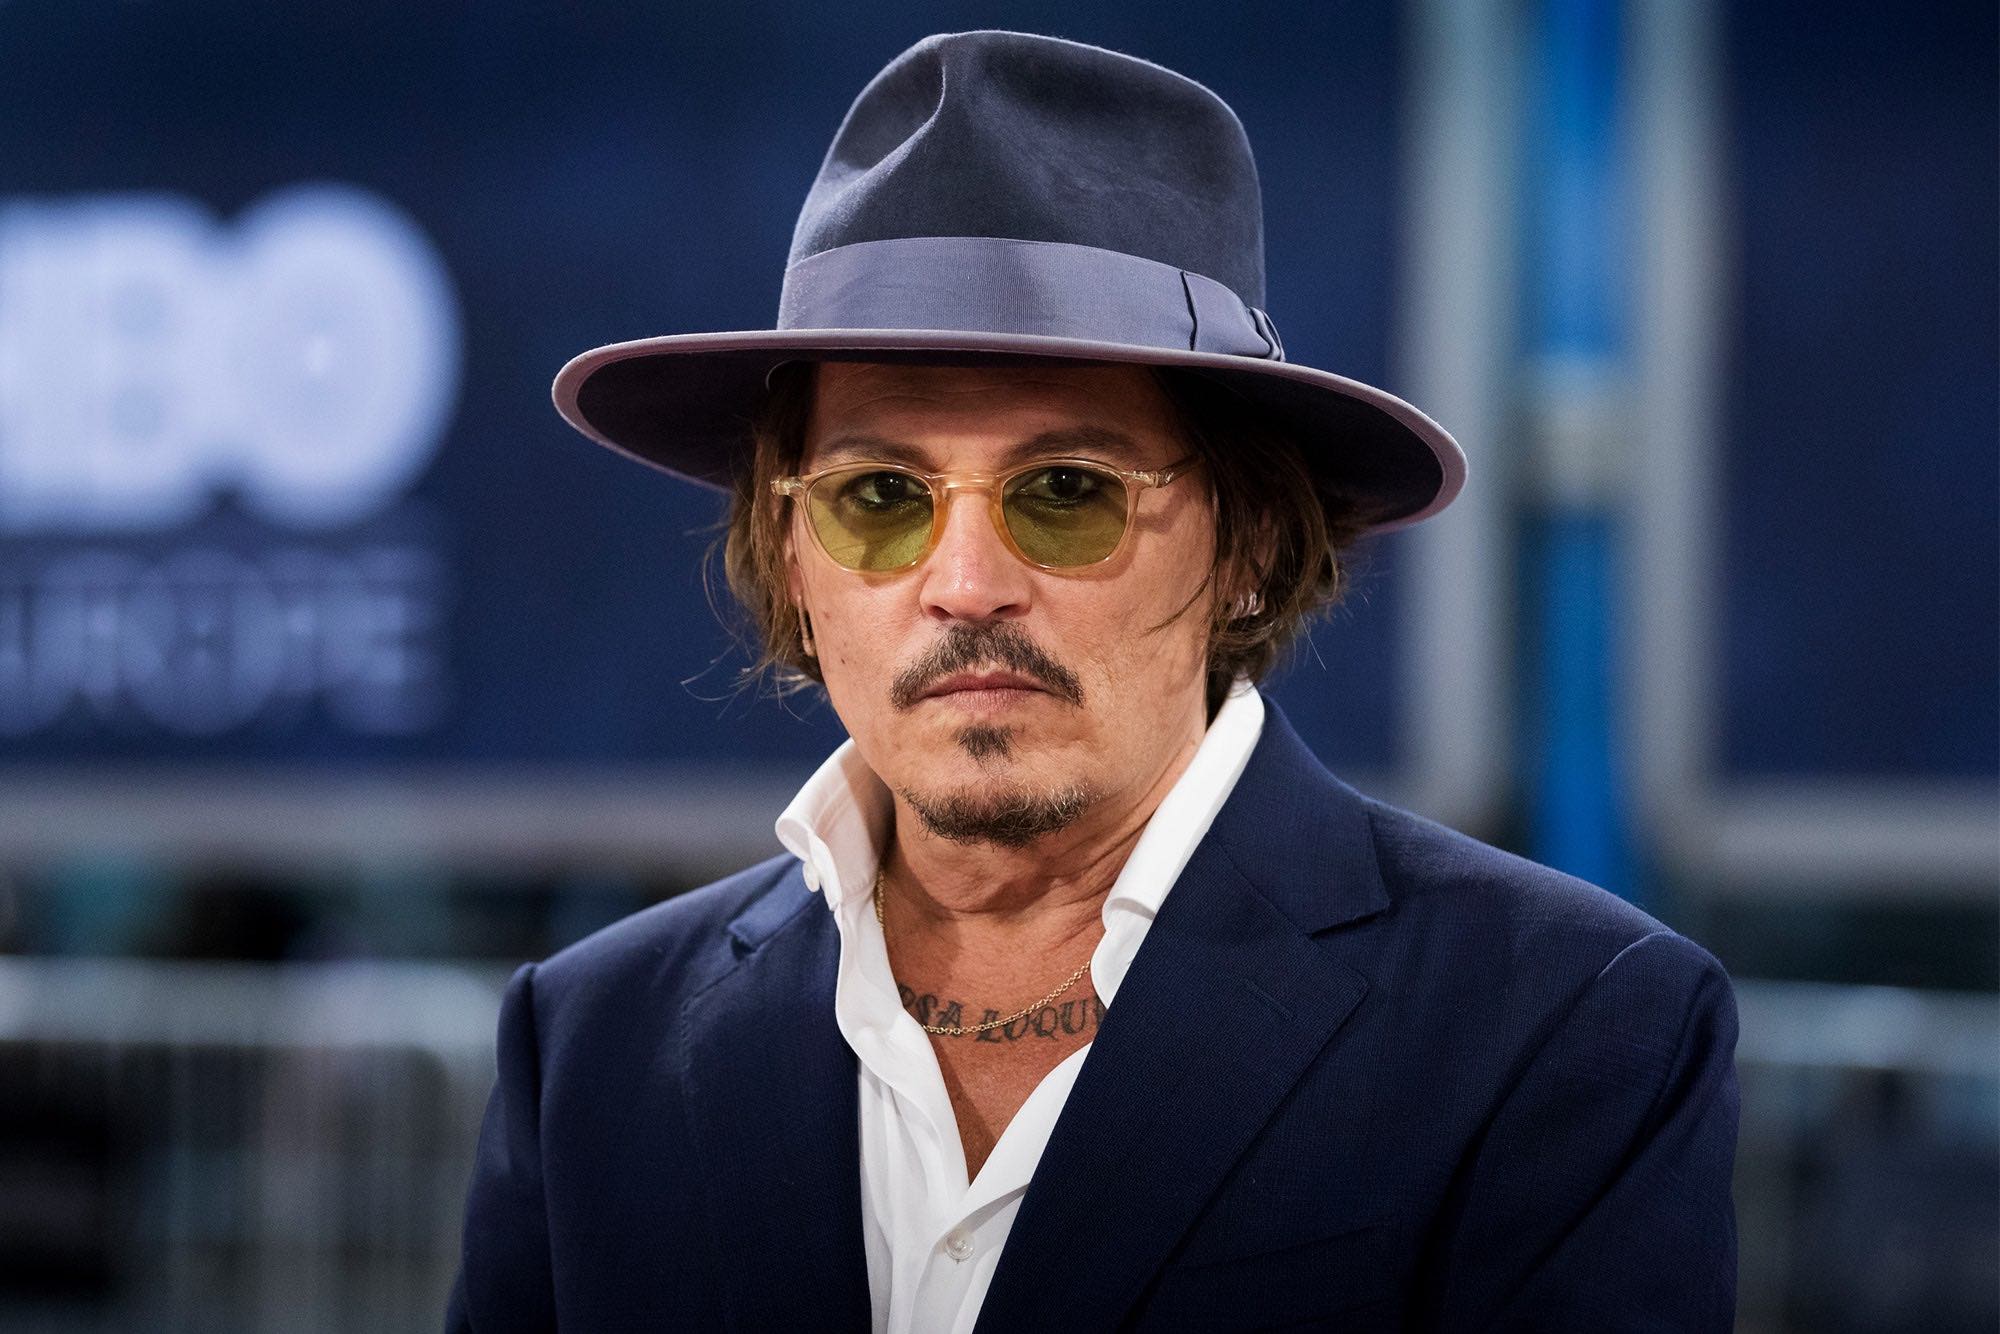 Johnny Depp made his feature debut in 1984 with 'A Nightmare on Elm Street'. Slash open his career and check out the roles that made him a massive star.